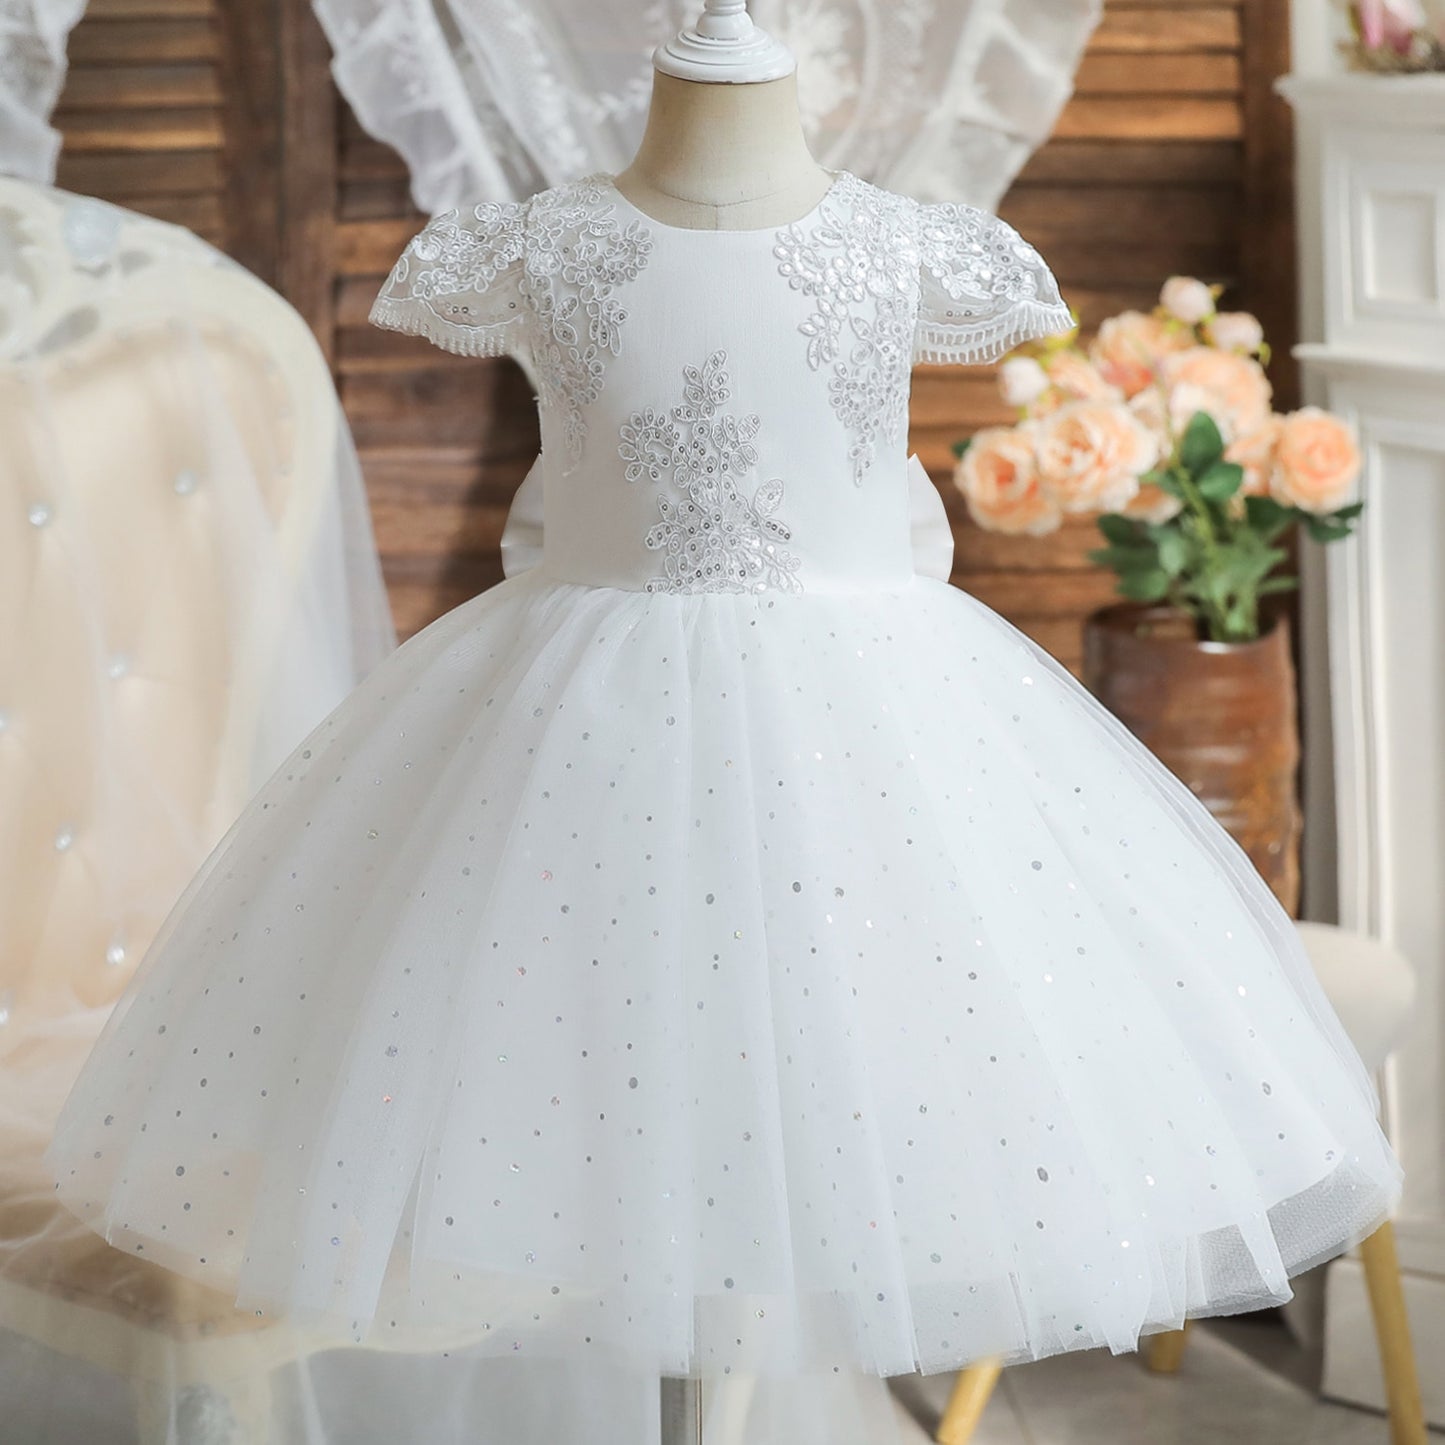 Load image into Gallery viewer, Cute Baby 1-5 Yrs Toddler Girls Embroidery Lace Party Dresses
